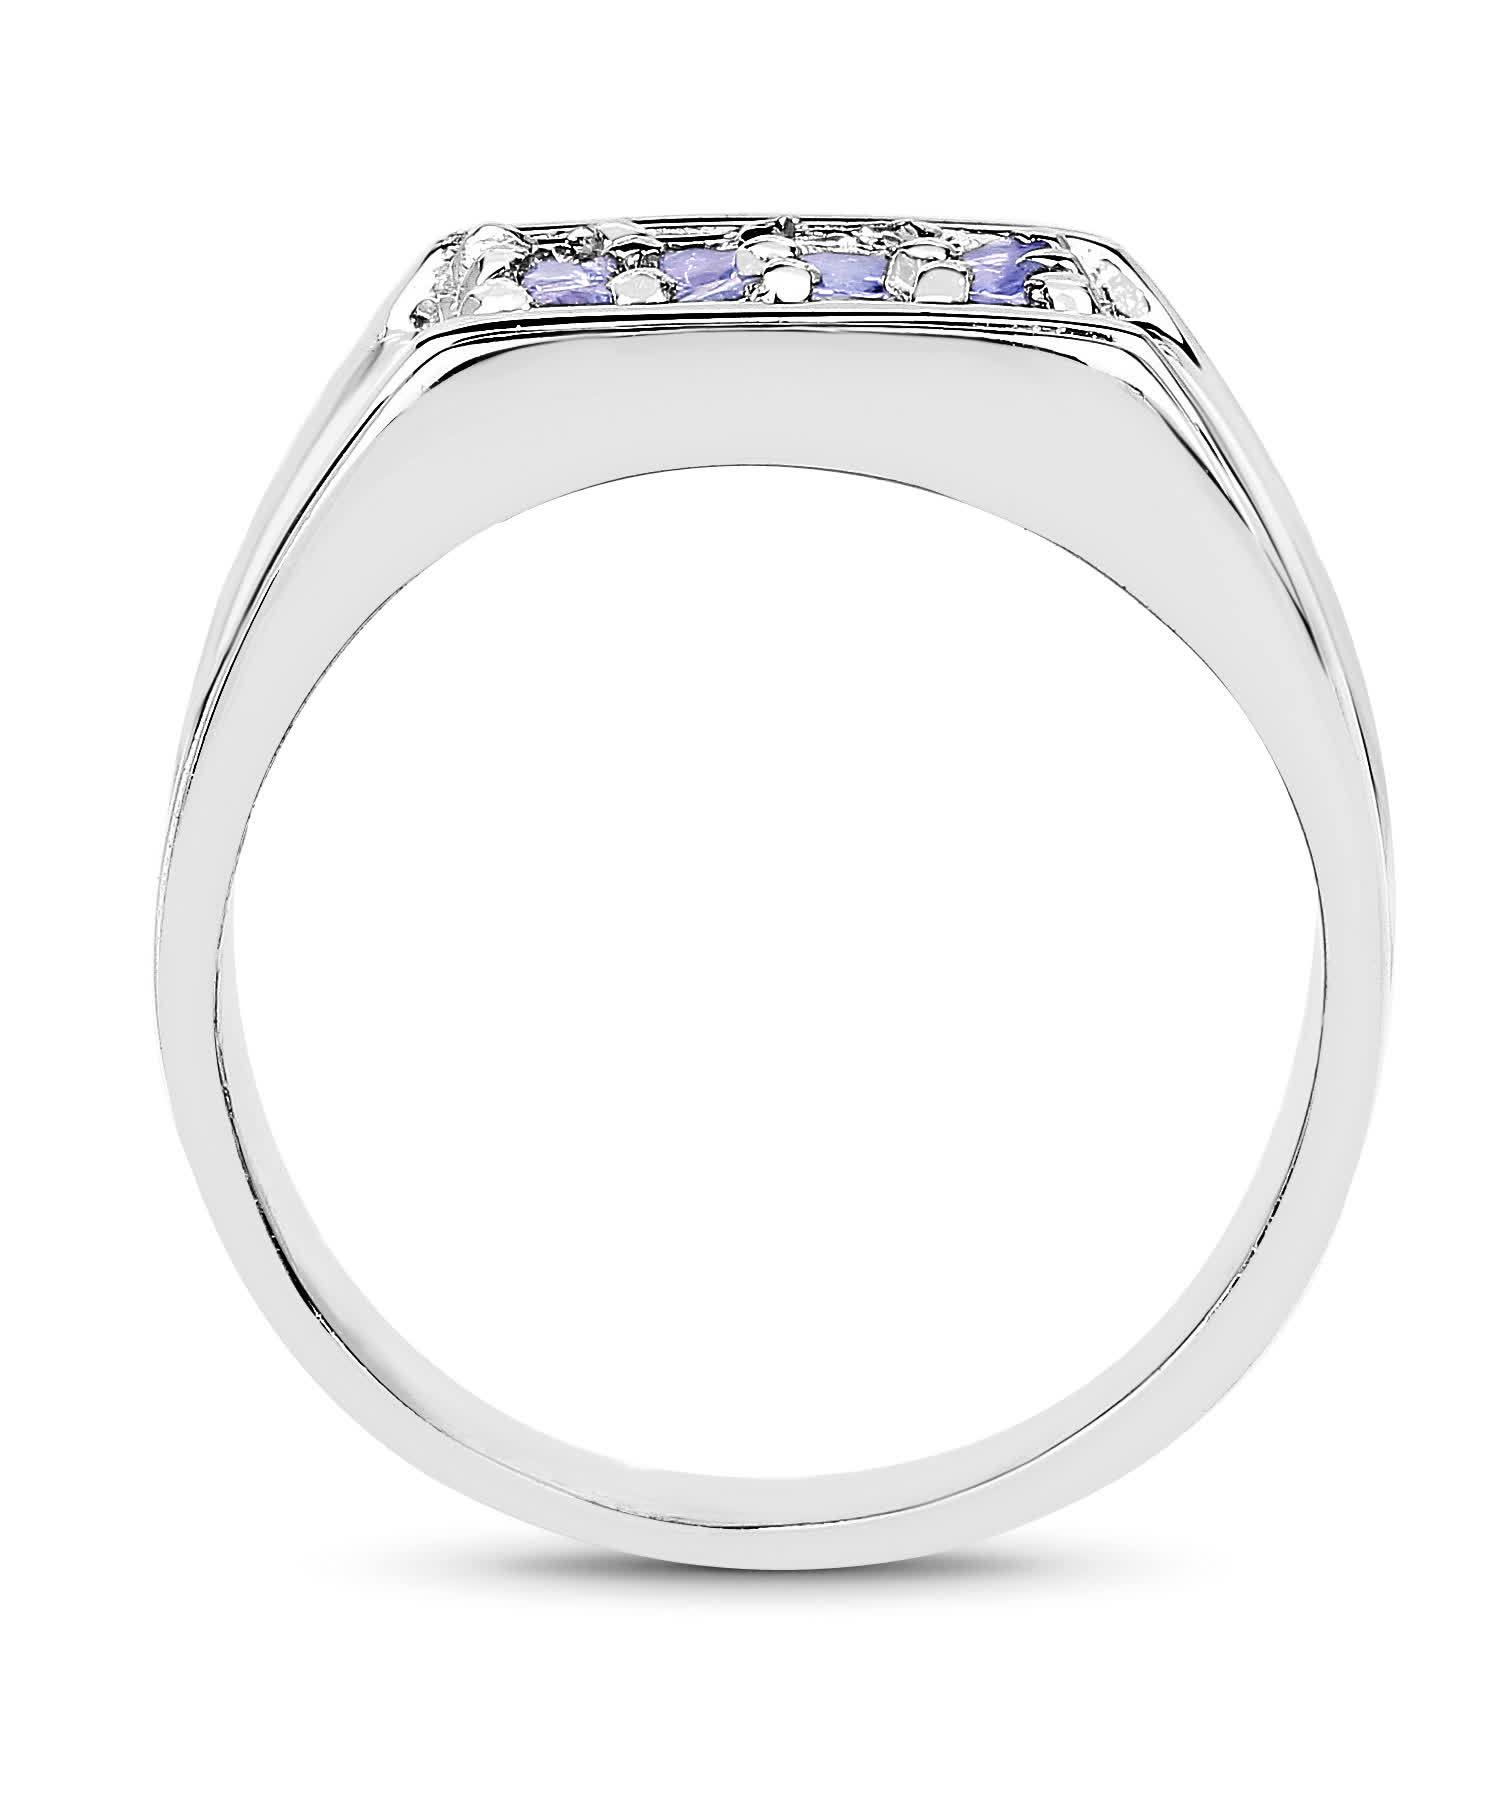 0.56ctw Natural Tanzanite Rhodium Plated 925 Sterling Silver Ring View 2